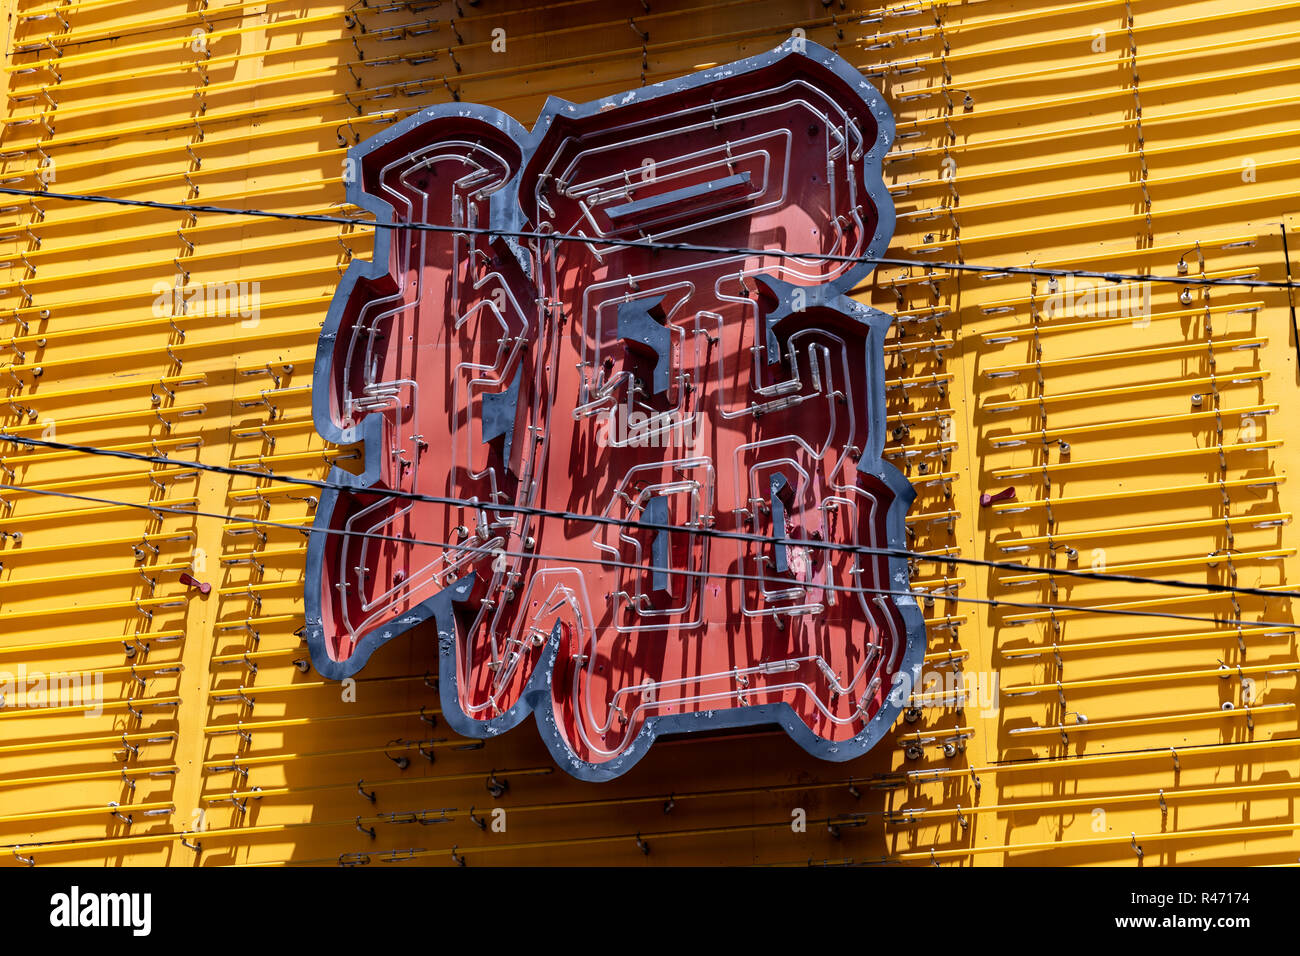 Japanese character on a red and yellow neon sign (堀, 'hori': ditch, moat, canal); Tokyo, Japan Stock Photo